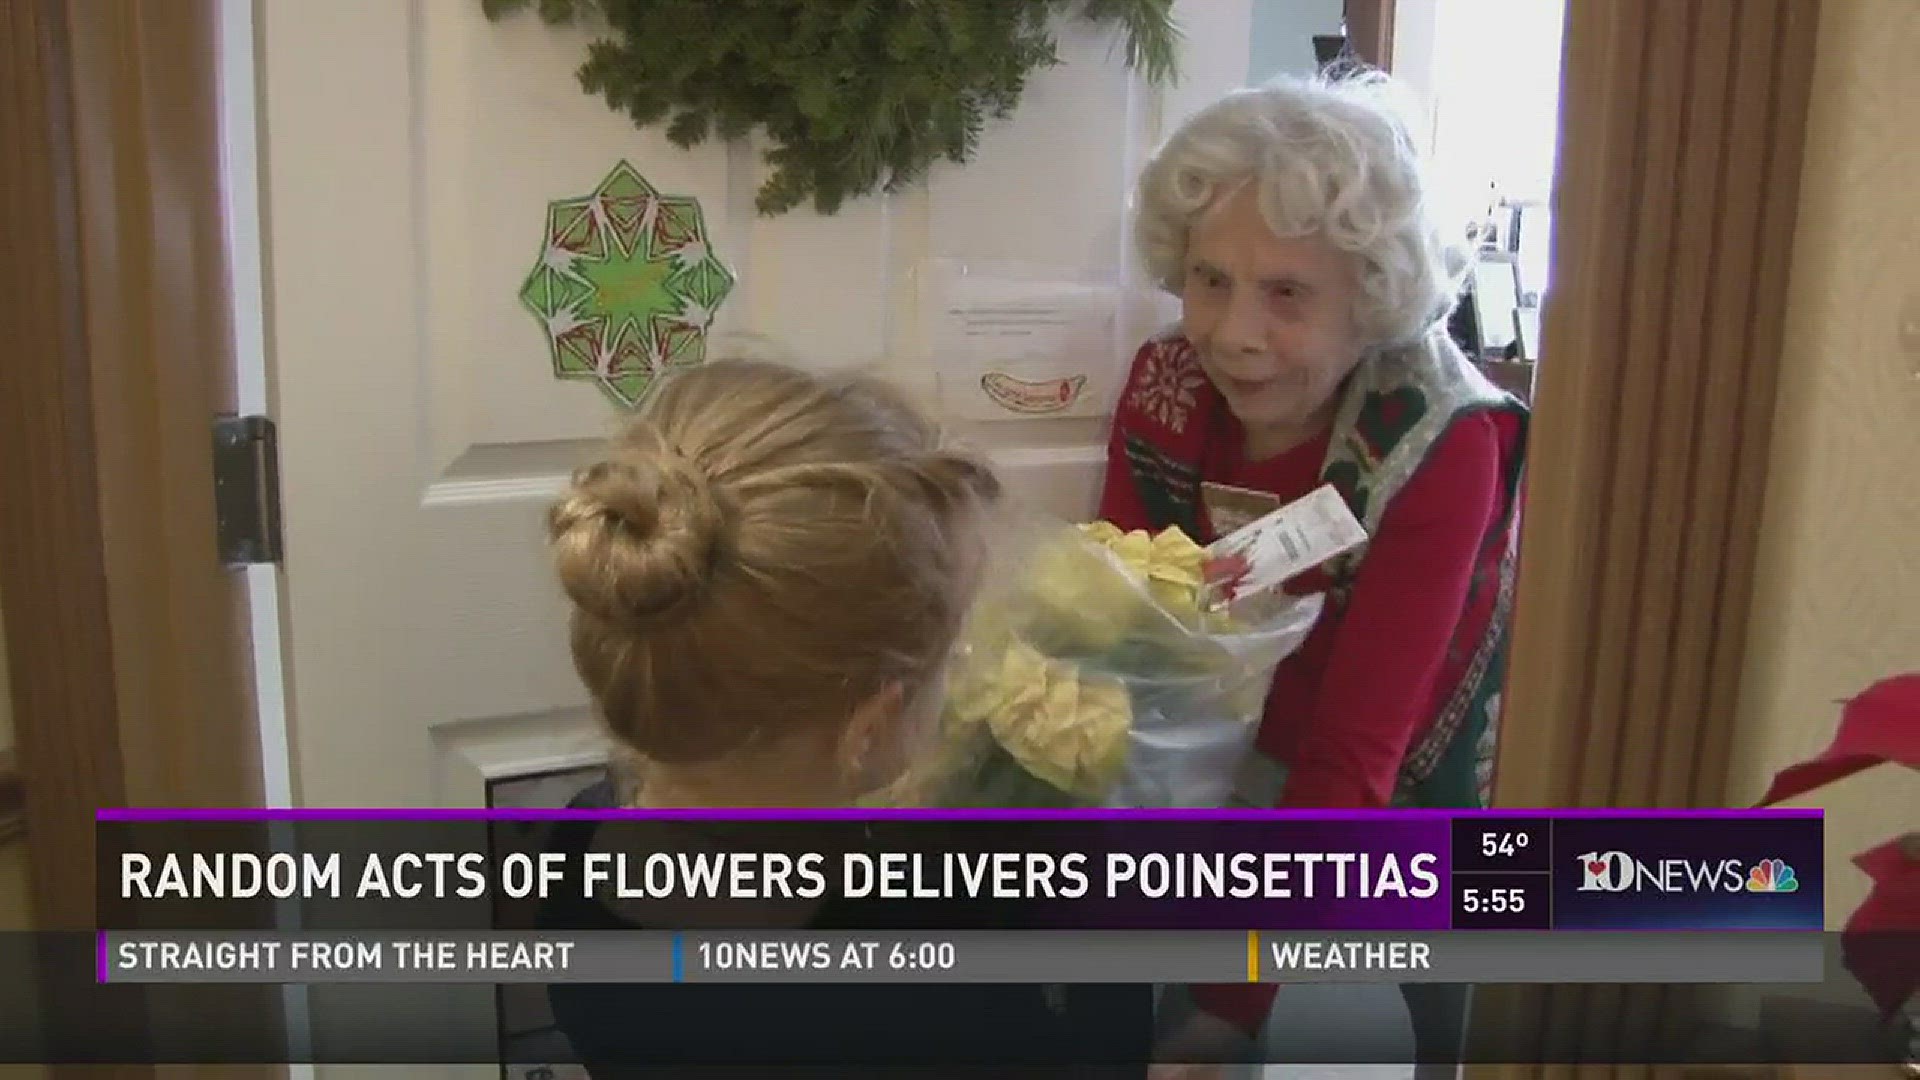 Random Acts of Flowers brought cheer Friday to